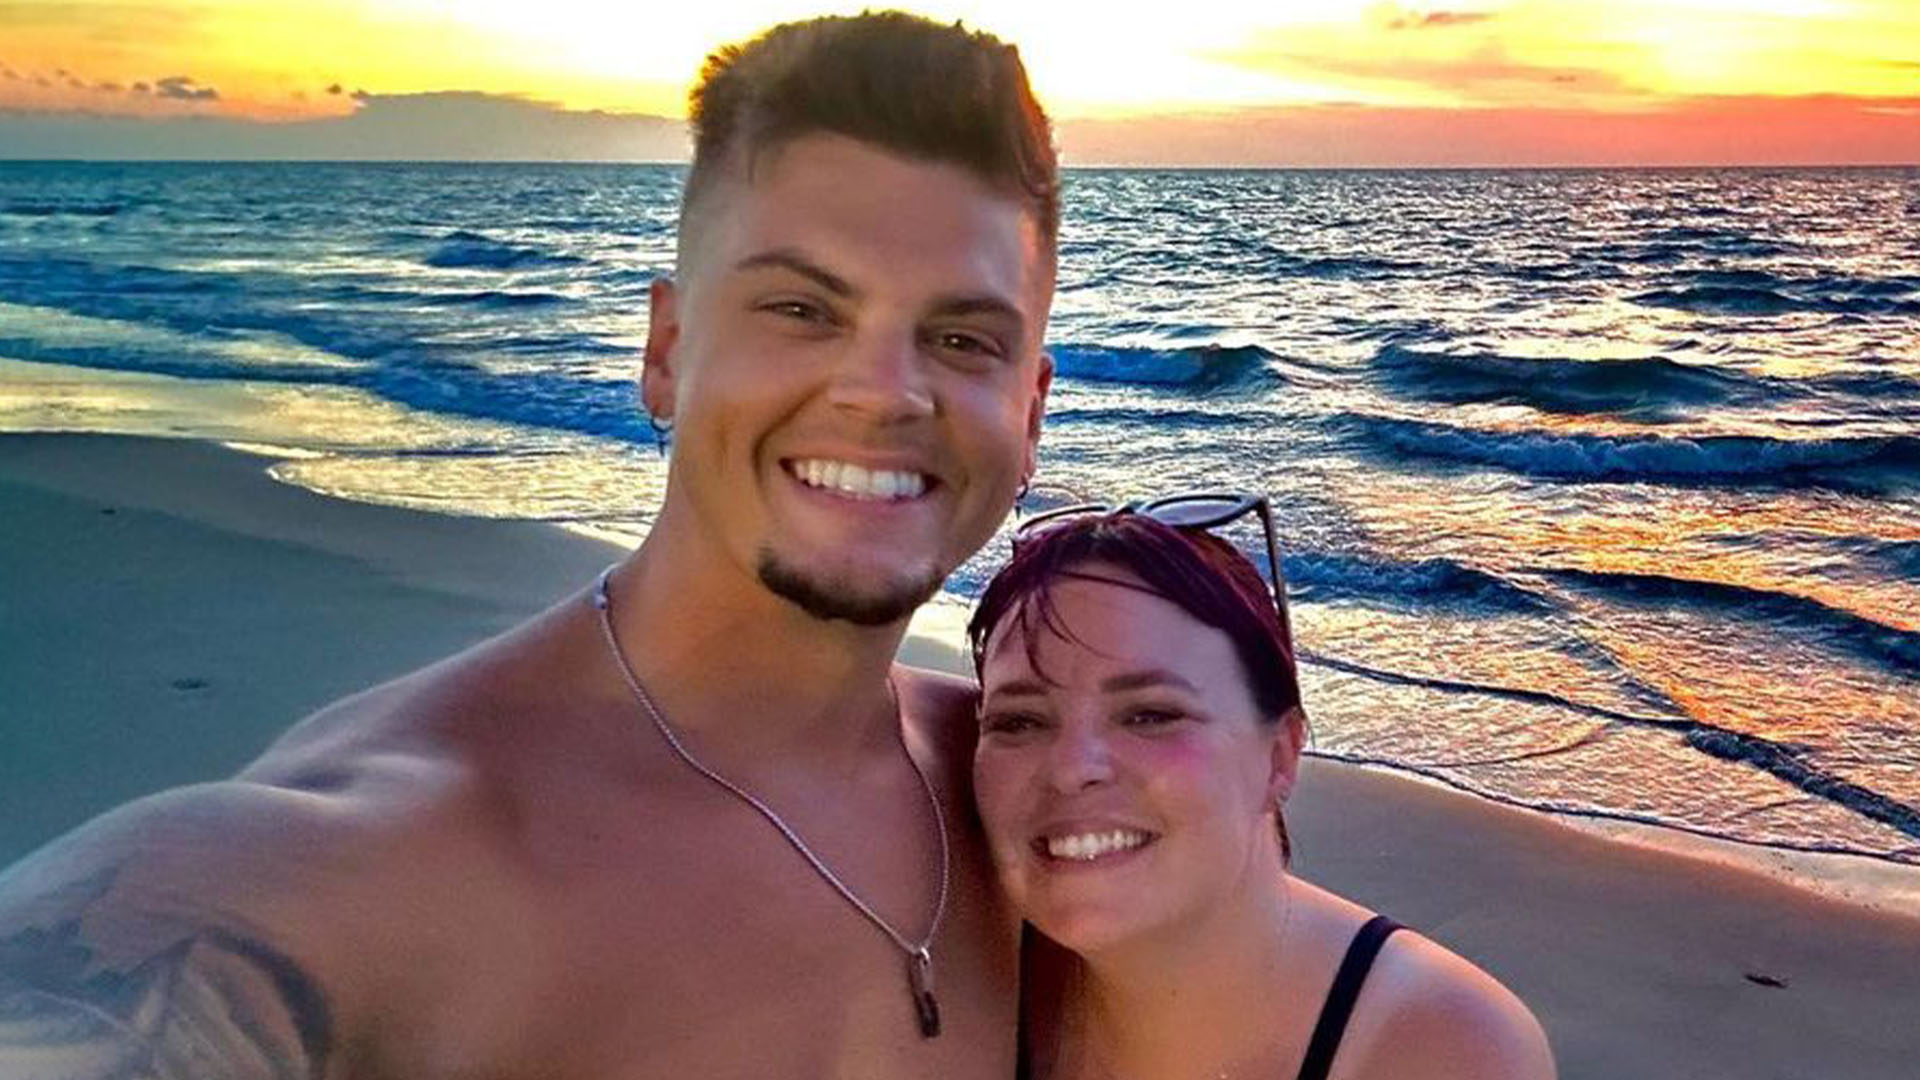 ‘Two babies in love’ Teen Mom fans gush as Catelynn Lowell & Tyler Baltierra look unrecognizable from early dating days